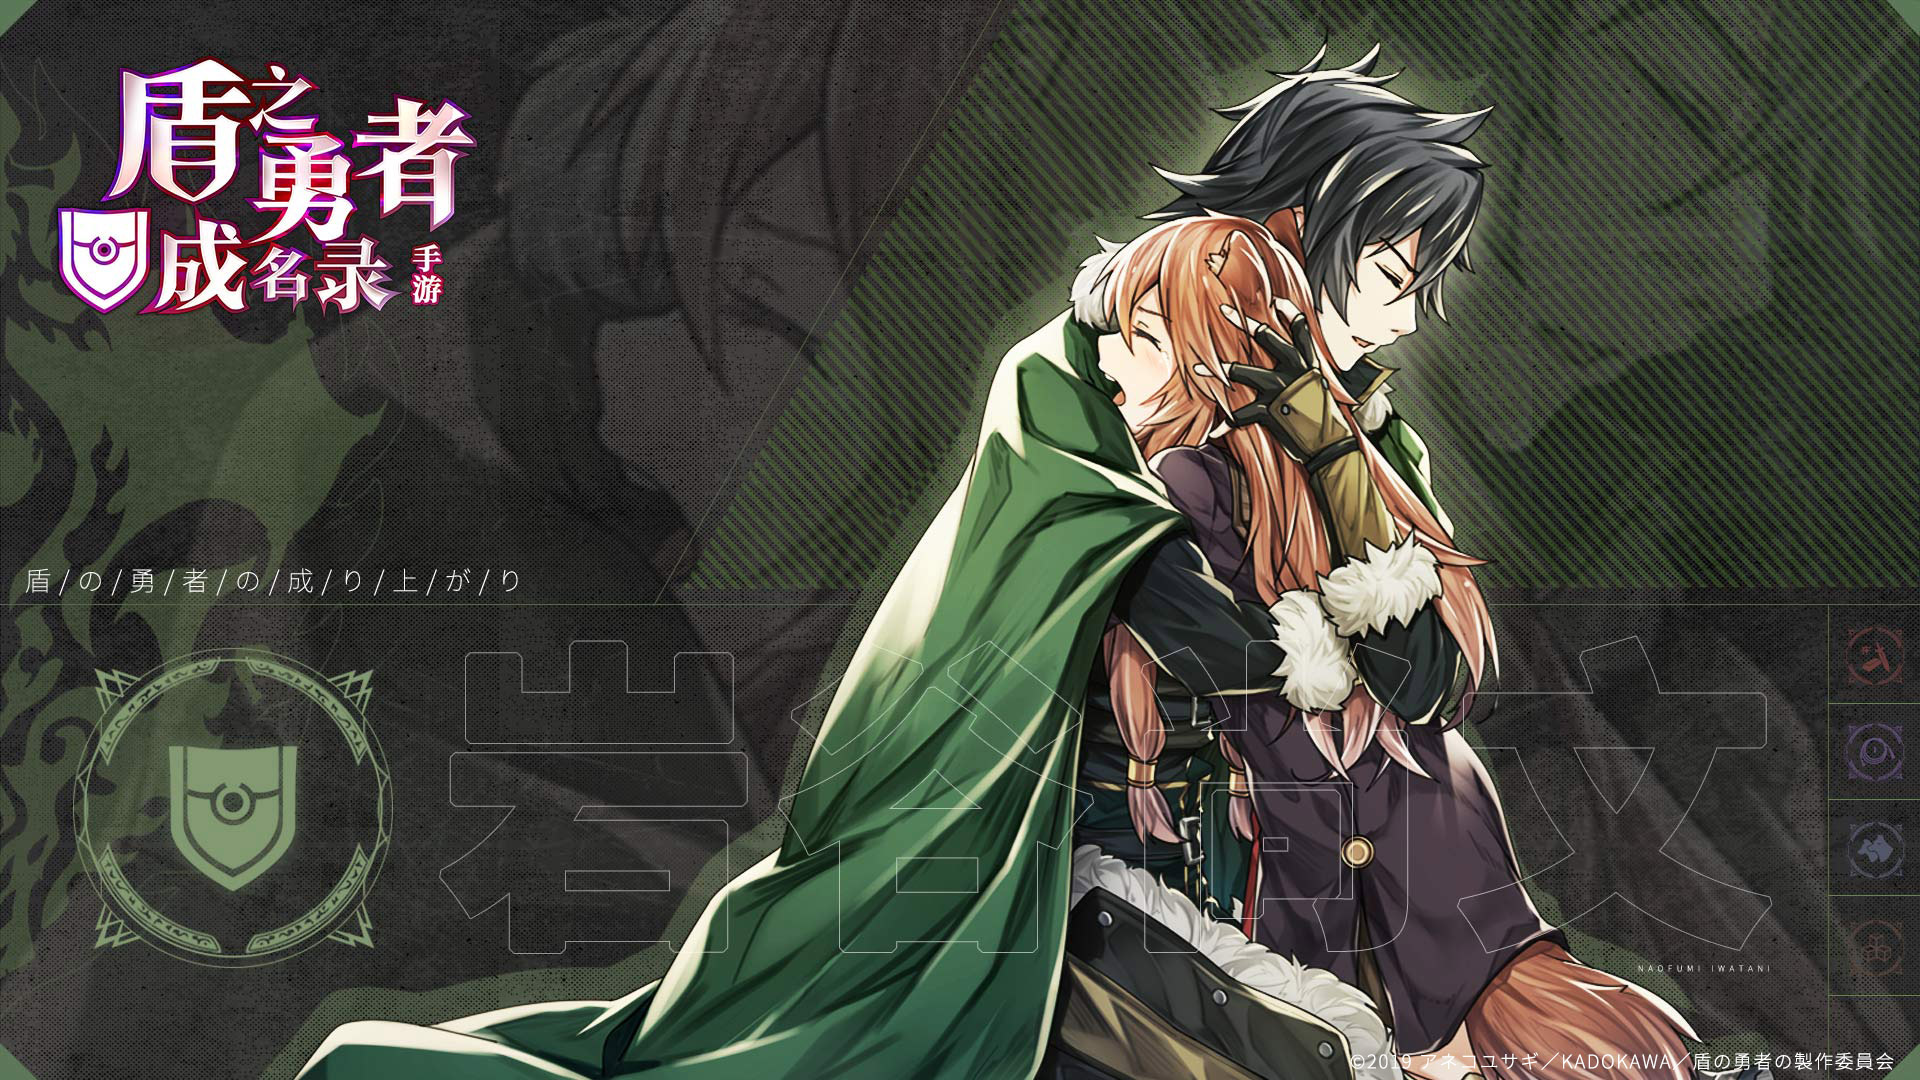 The Rising of the Shield Hero HD Wallpapers and Backgrounds. 